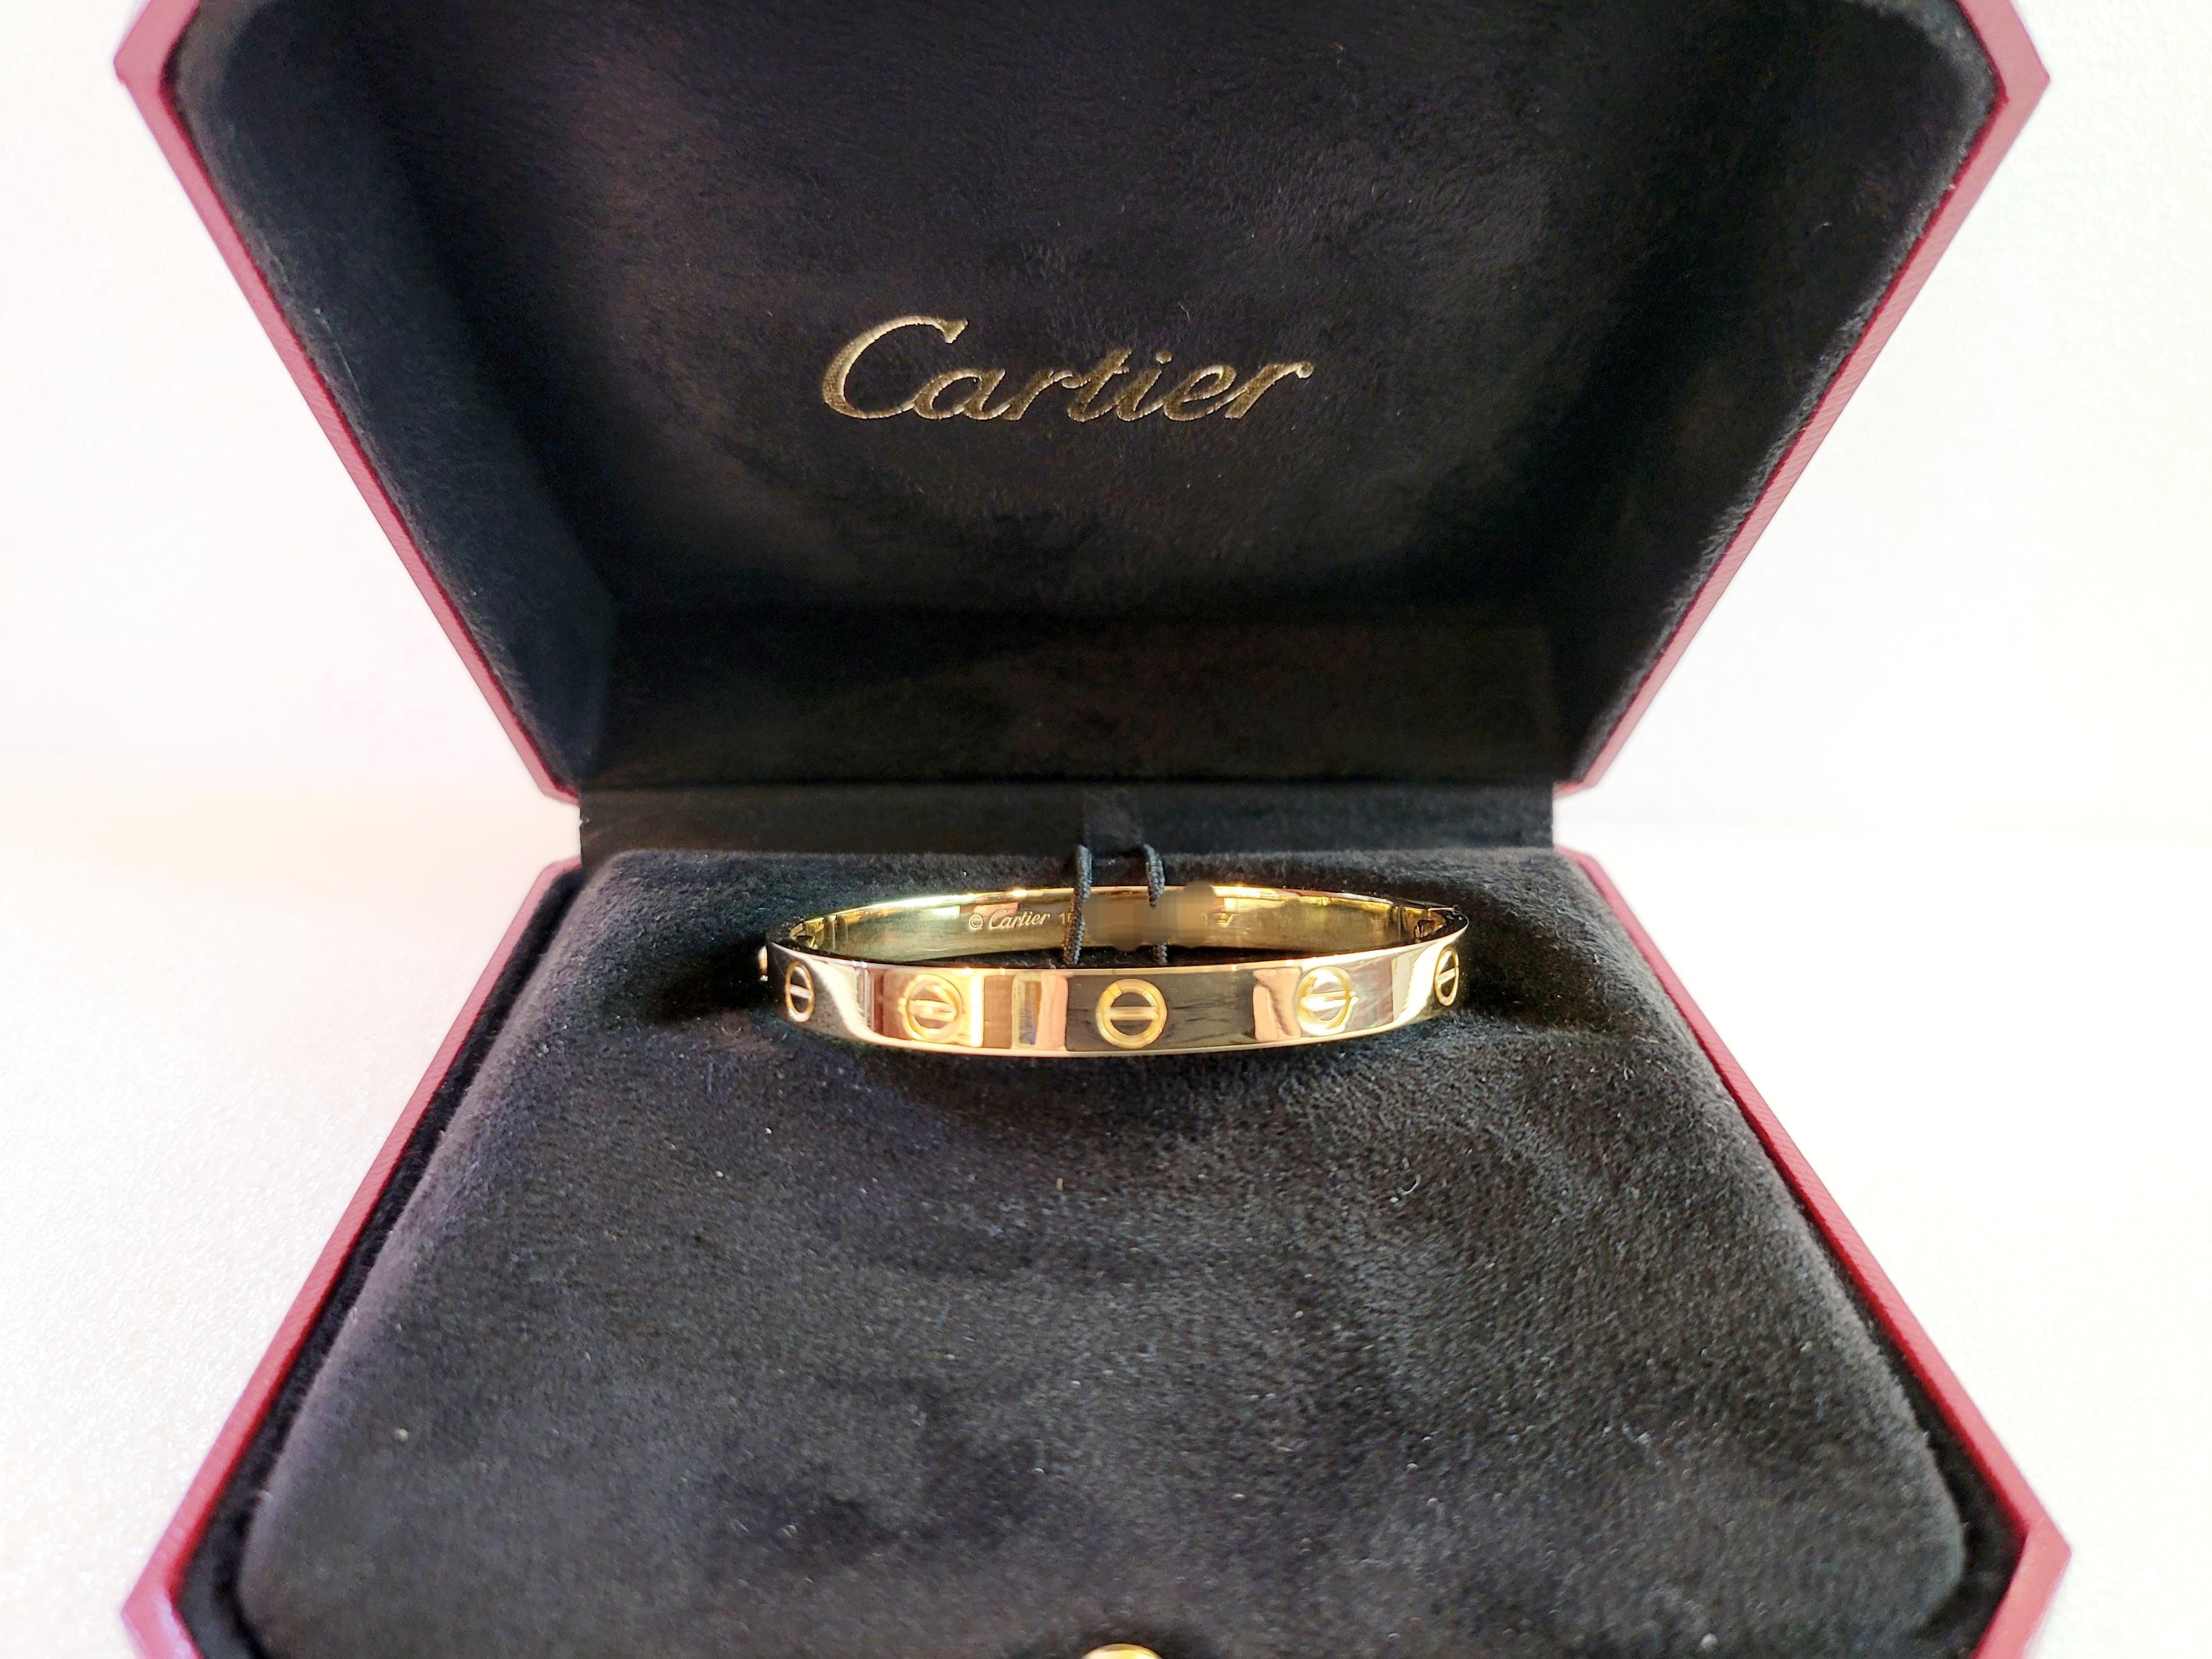 Brand Cartier 
Material 18K Yellow Gold 
Type Love Bracelet 
Bracelet Size 16
Bracelet width 6.1 mm
Bracelet Weight 29gr
Mint Condition, like new
Comes with Screwdriver 
Included Box no Paper 
Retail Price $7,350
Occasion: Anniversary, Birthday,